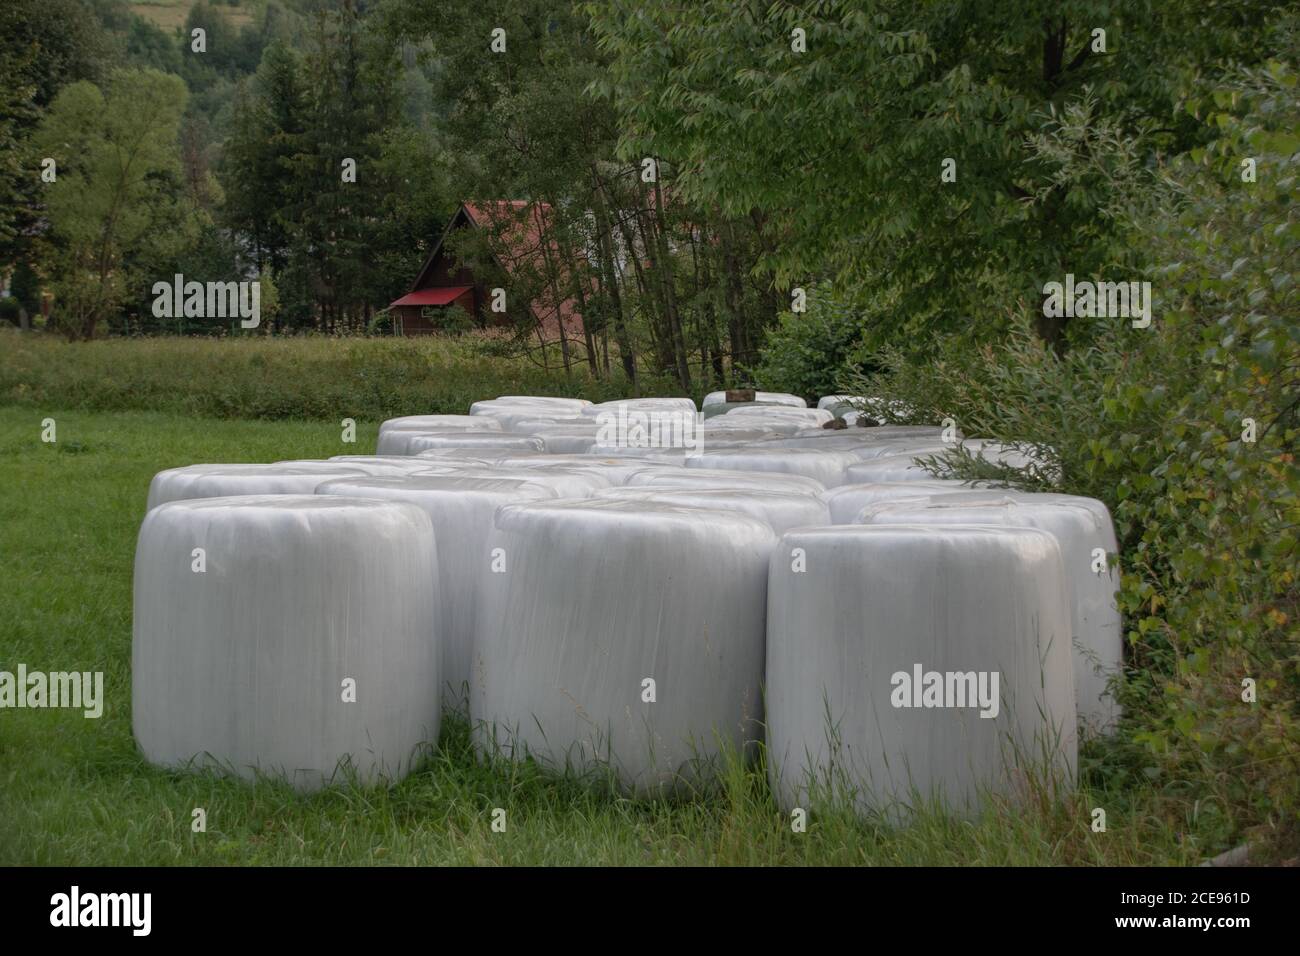 Round bales of hay on a farming field. Preparation for winter. Straw packed in white foil. Bales of hay lying on the meadow during haymaking. Stock Photo